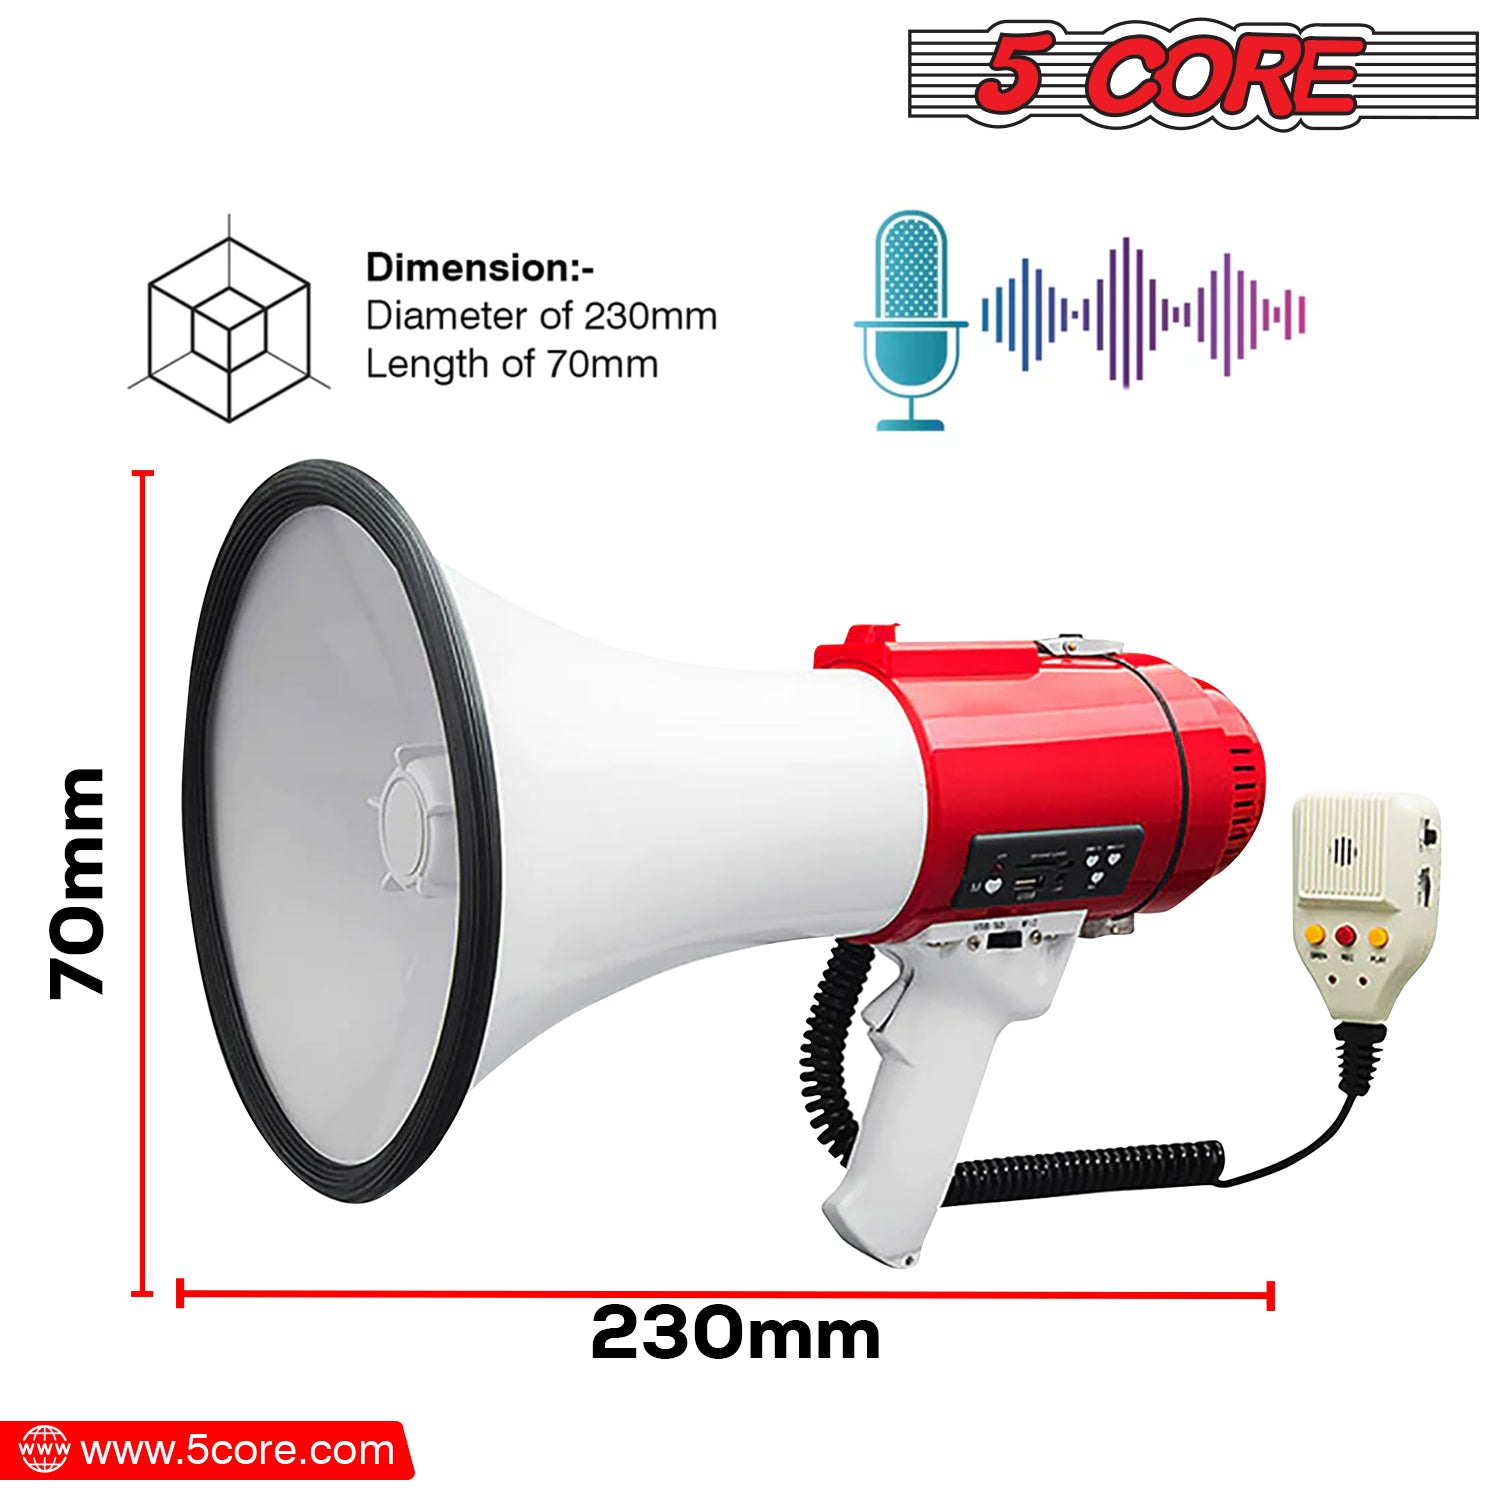 5 Core High Power Megaphone 60W Loud Siren Noise Maker Professional Bullhorn Speaker Rechargeable PA System w Recording USB SD Card Adjustable Volume for Sports Speeches Events Emergencies - 77SF